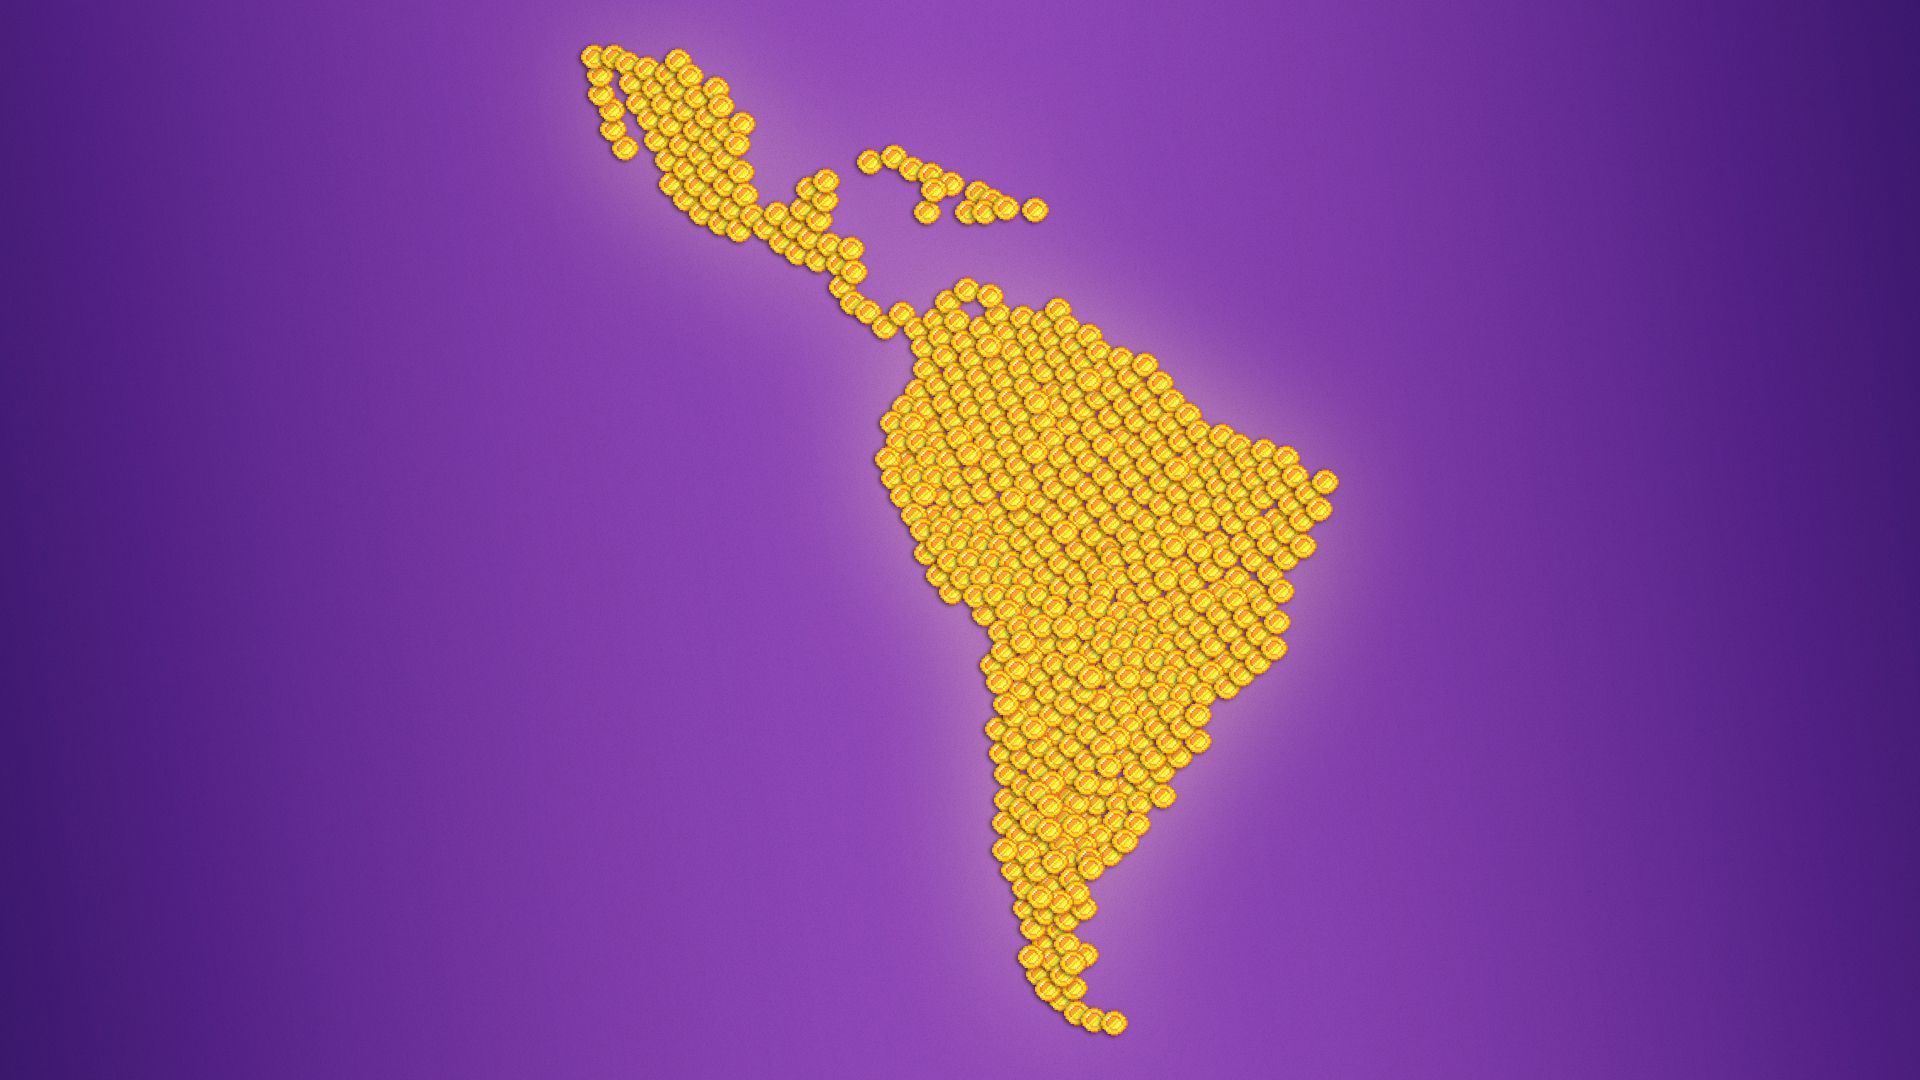 Illustration of pixelated coins arranged in the shape of Latin America.